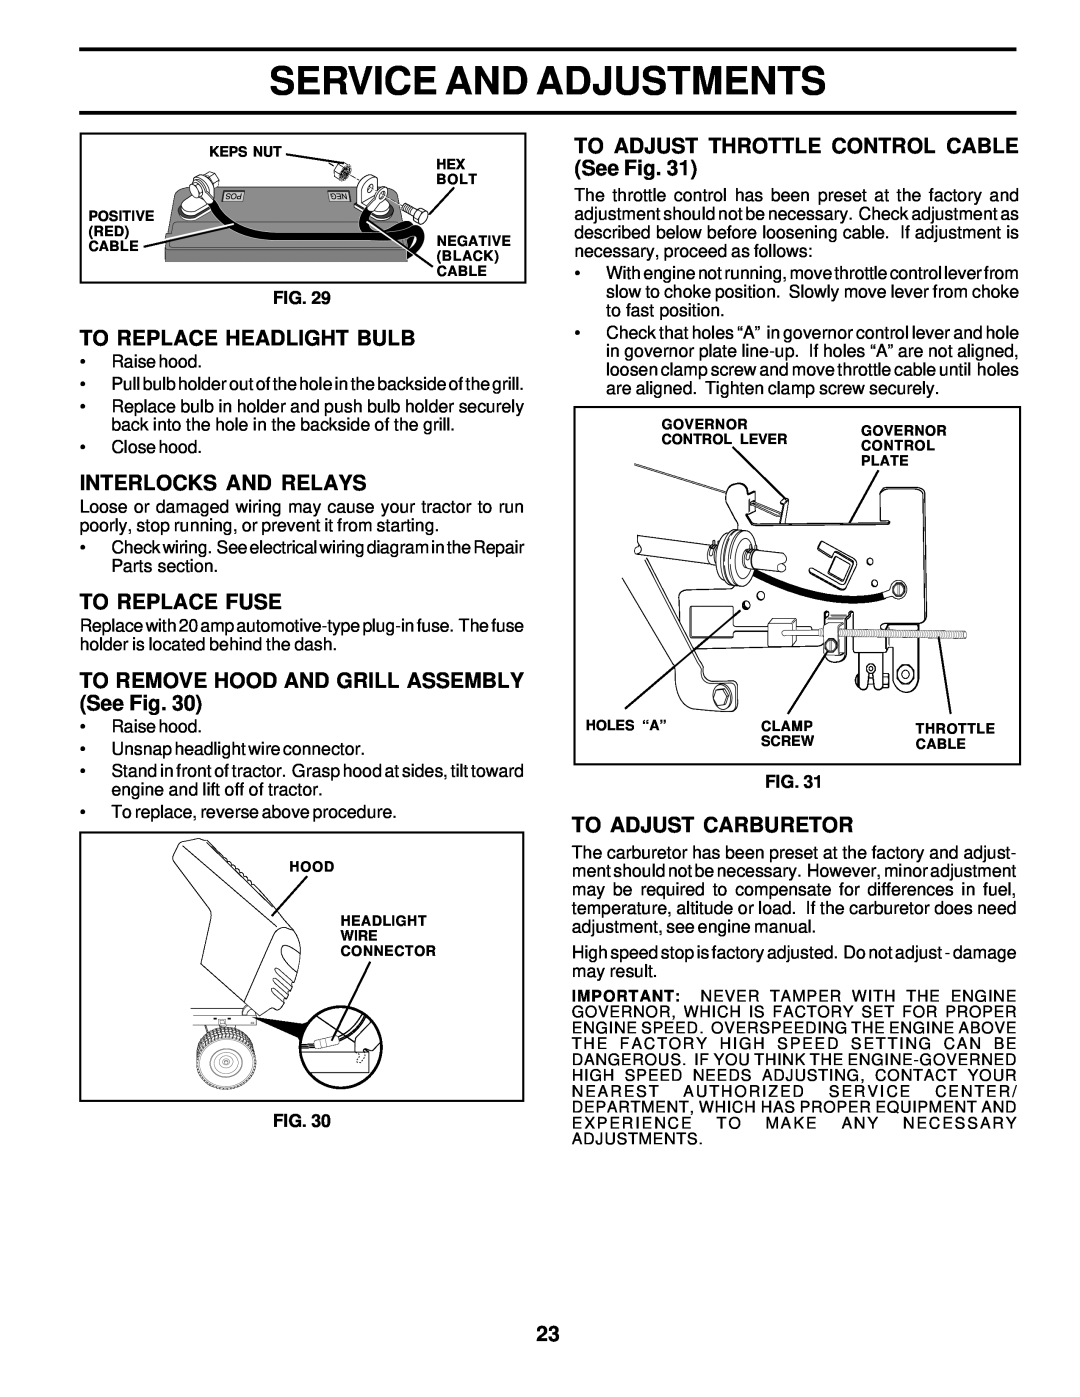 Poulan 176085 To Replace Headlight Bulb, Interlocks And Relays, To Replace Fuse, TO REMOVE HOOD AND GRILL ASSEMBLY See Fig 